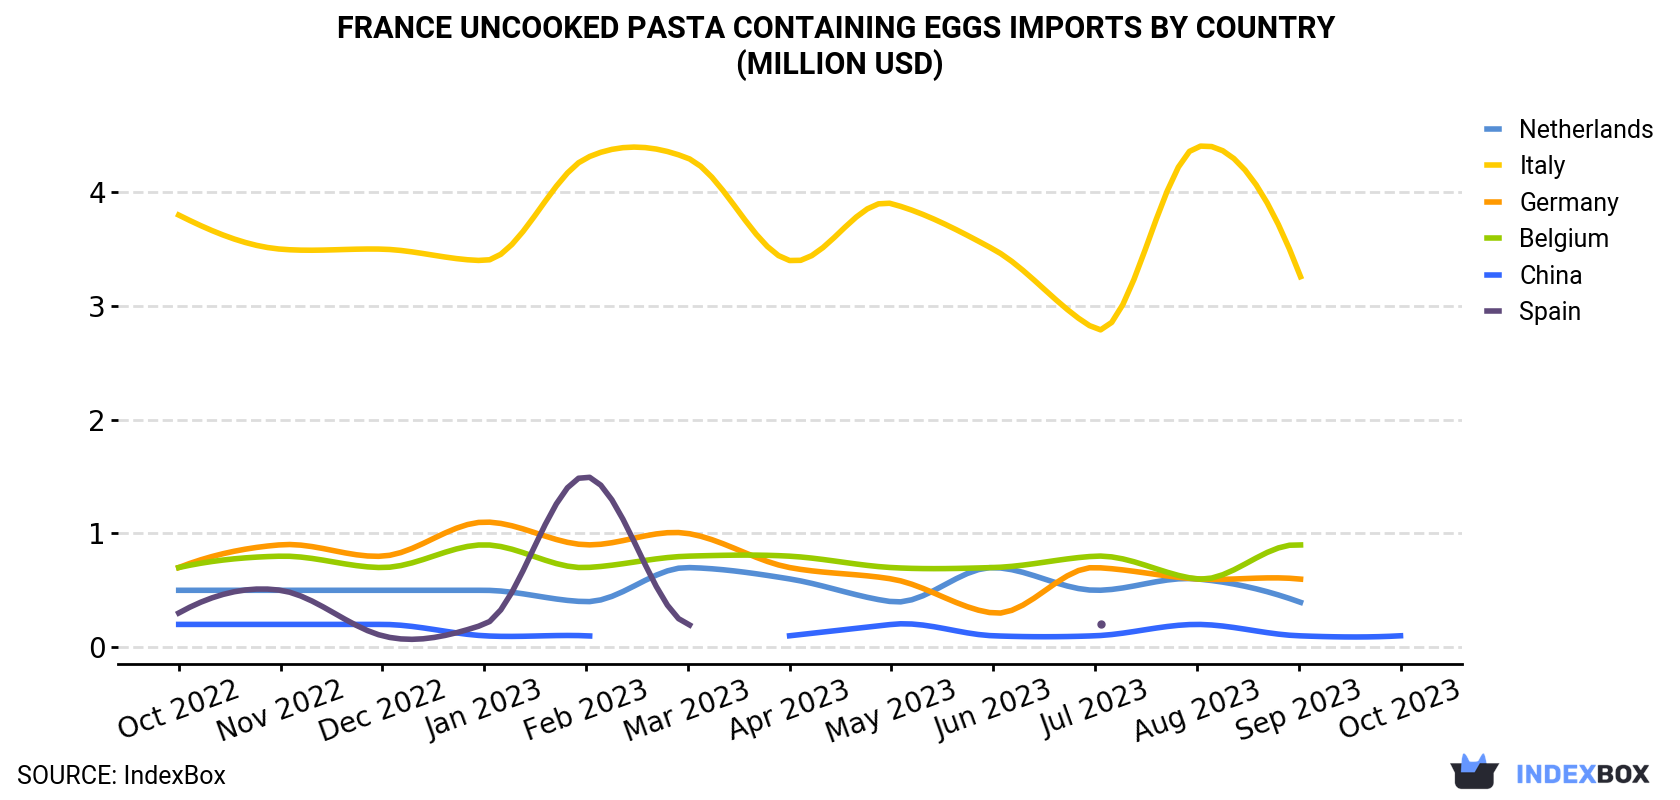 France Uncooked Pasta Containing Eggs Imports By Country (Million USD)